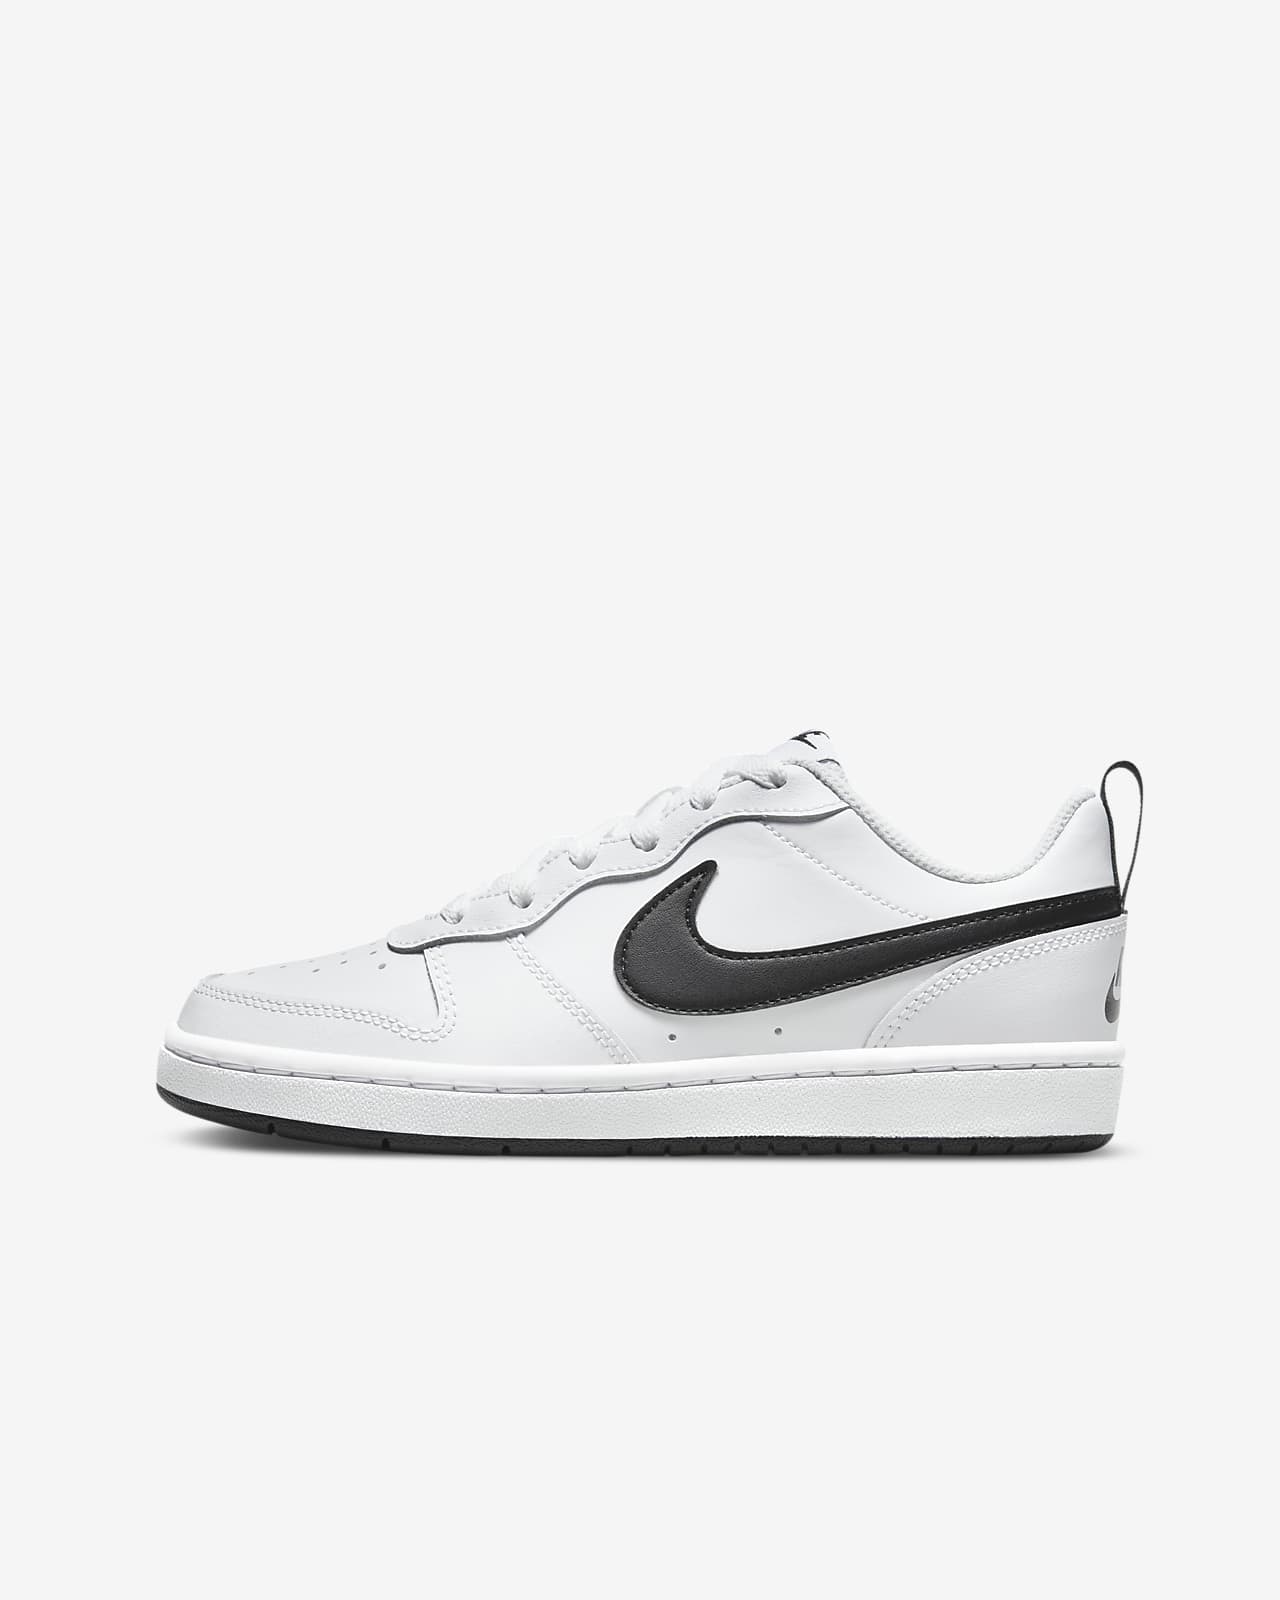 nike enfant chaussure fille شبشب بحر